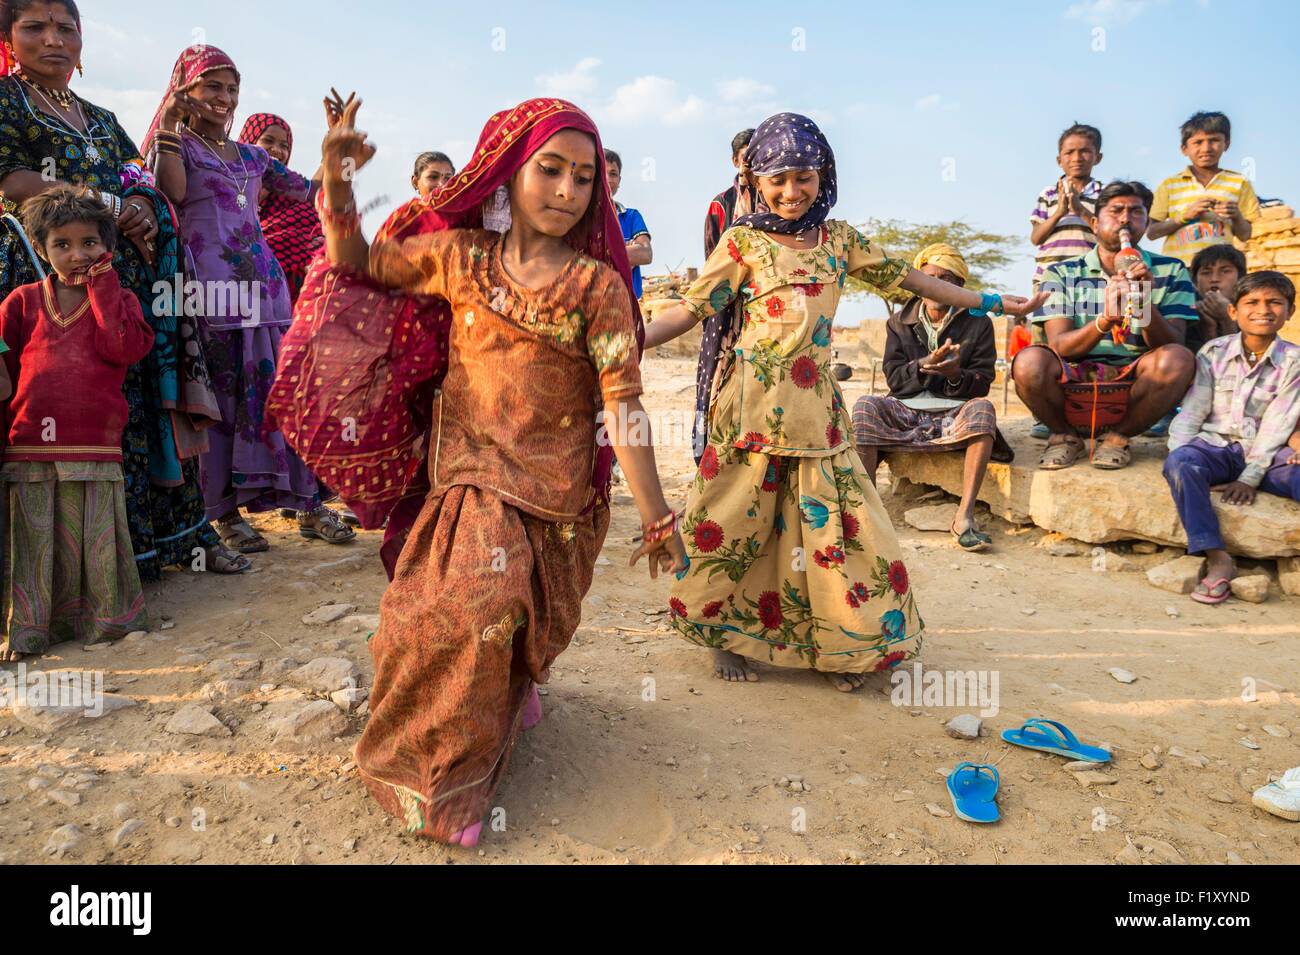 India, Rajasthan state, Jaisalmer, daning in a gipsy village Stock Photo